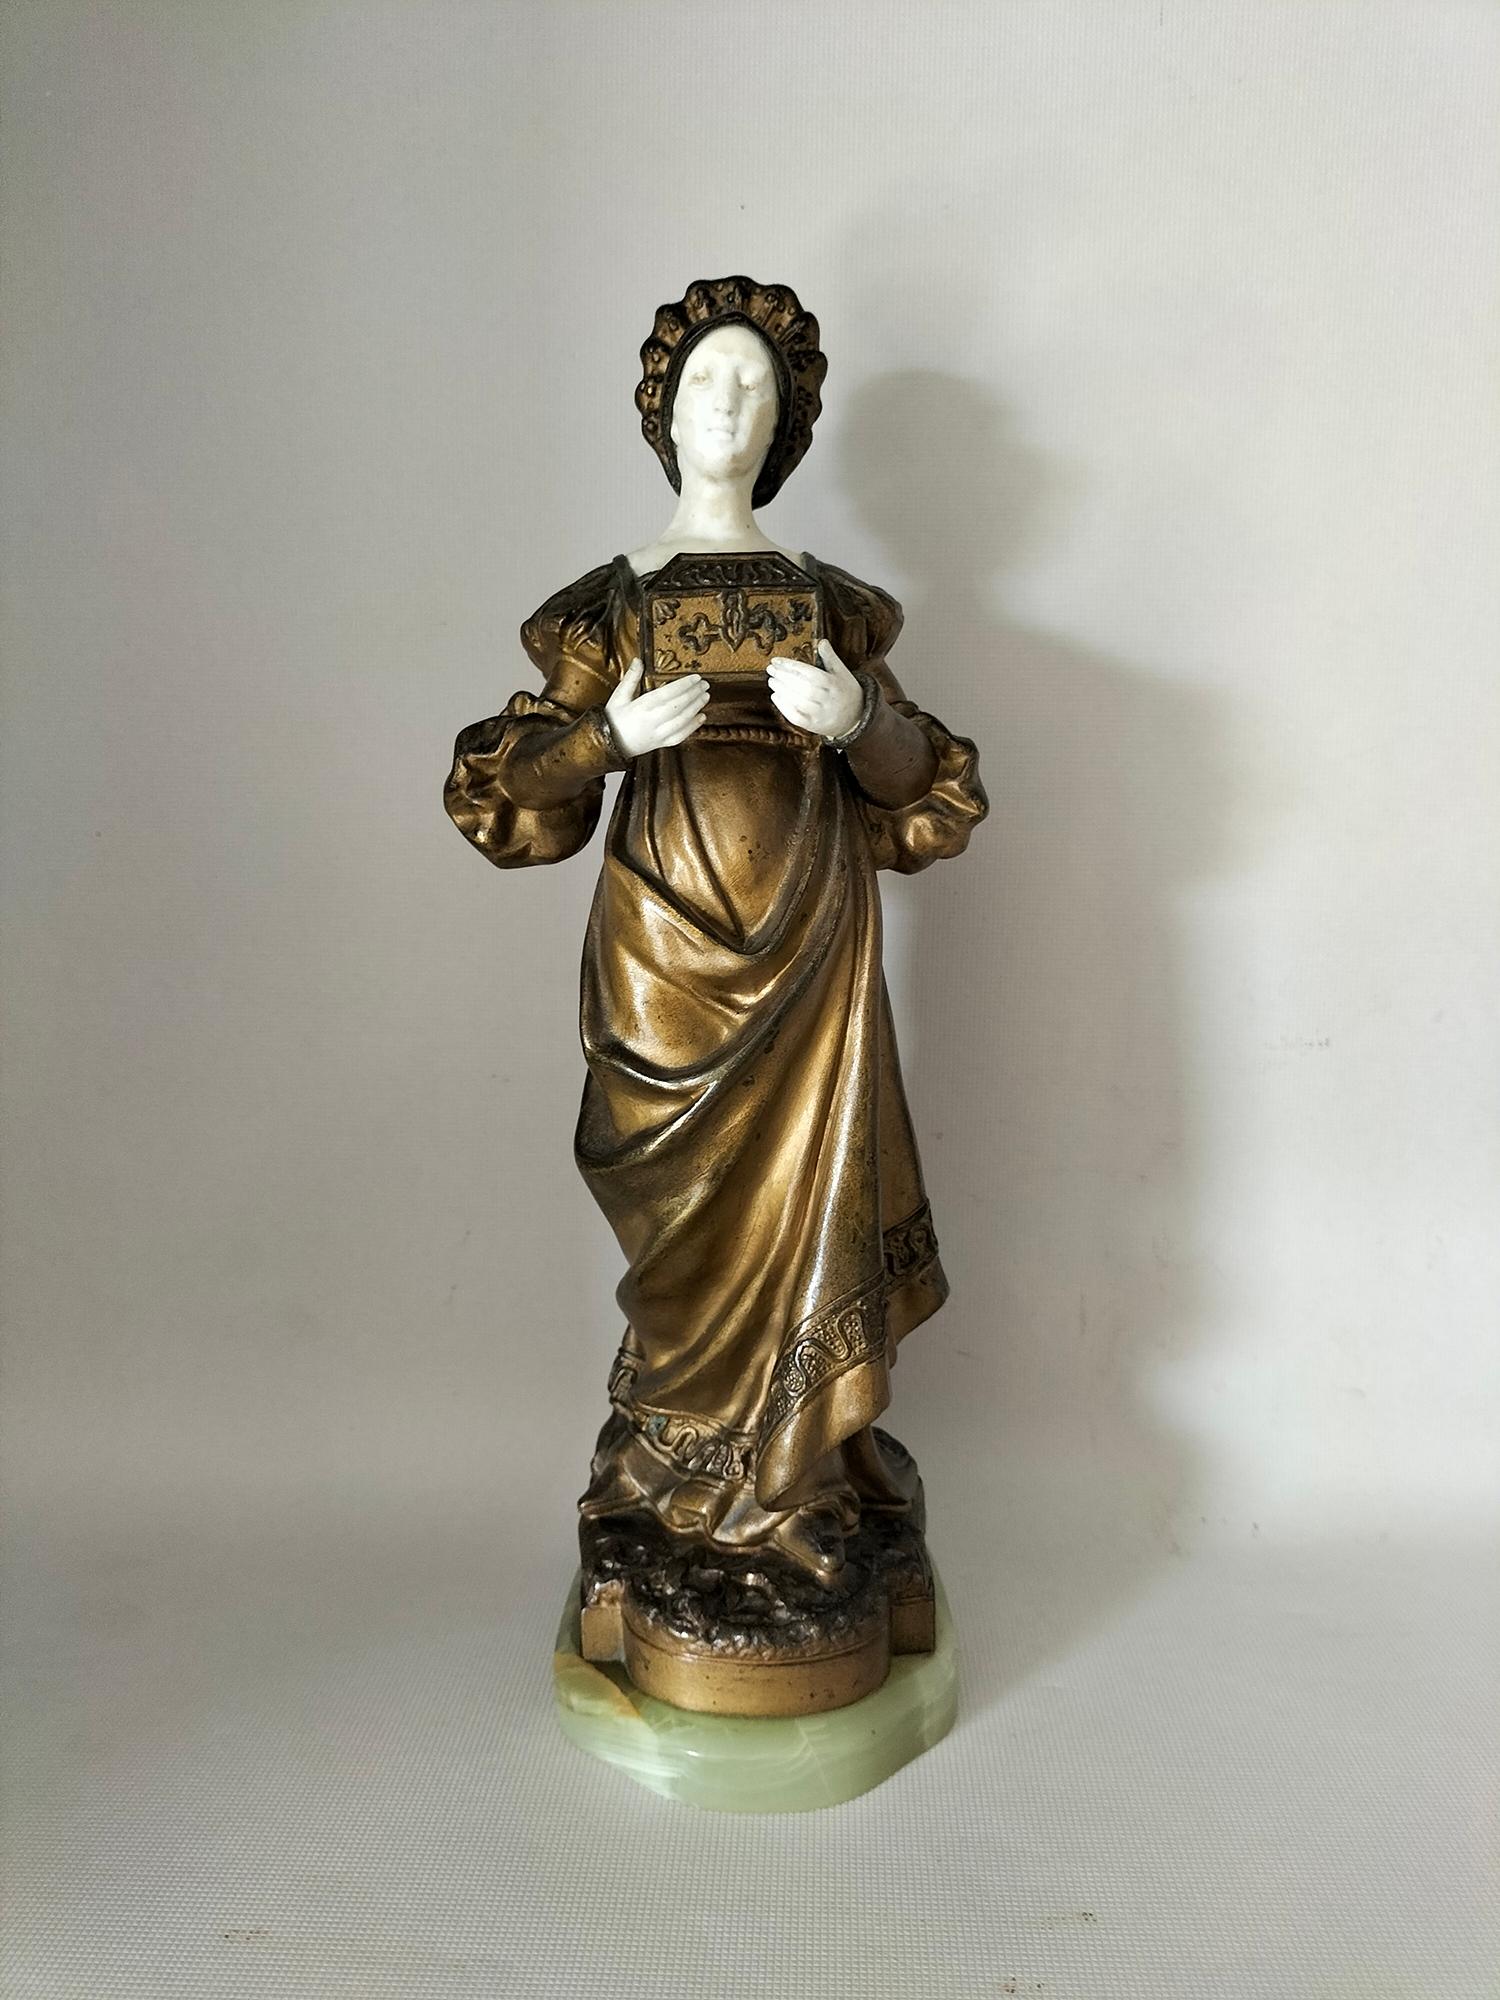 Calamine figure patinated in various golden tones, representing a woman in a period dress, carrying a chest.
Her hands and face are biscuit, with some wear to the face.
The base is in jade
Lady with a chest ( probably Marguerite of Faust. 
Faust is